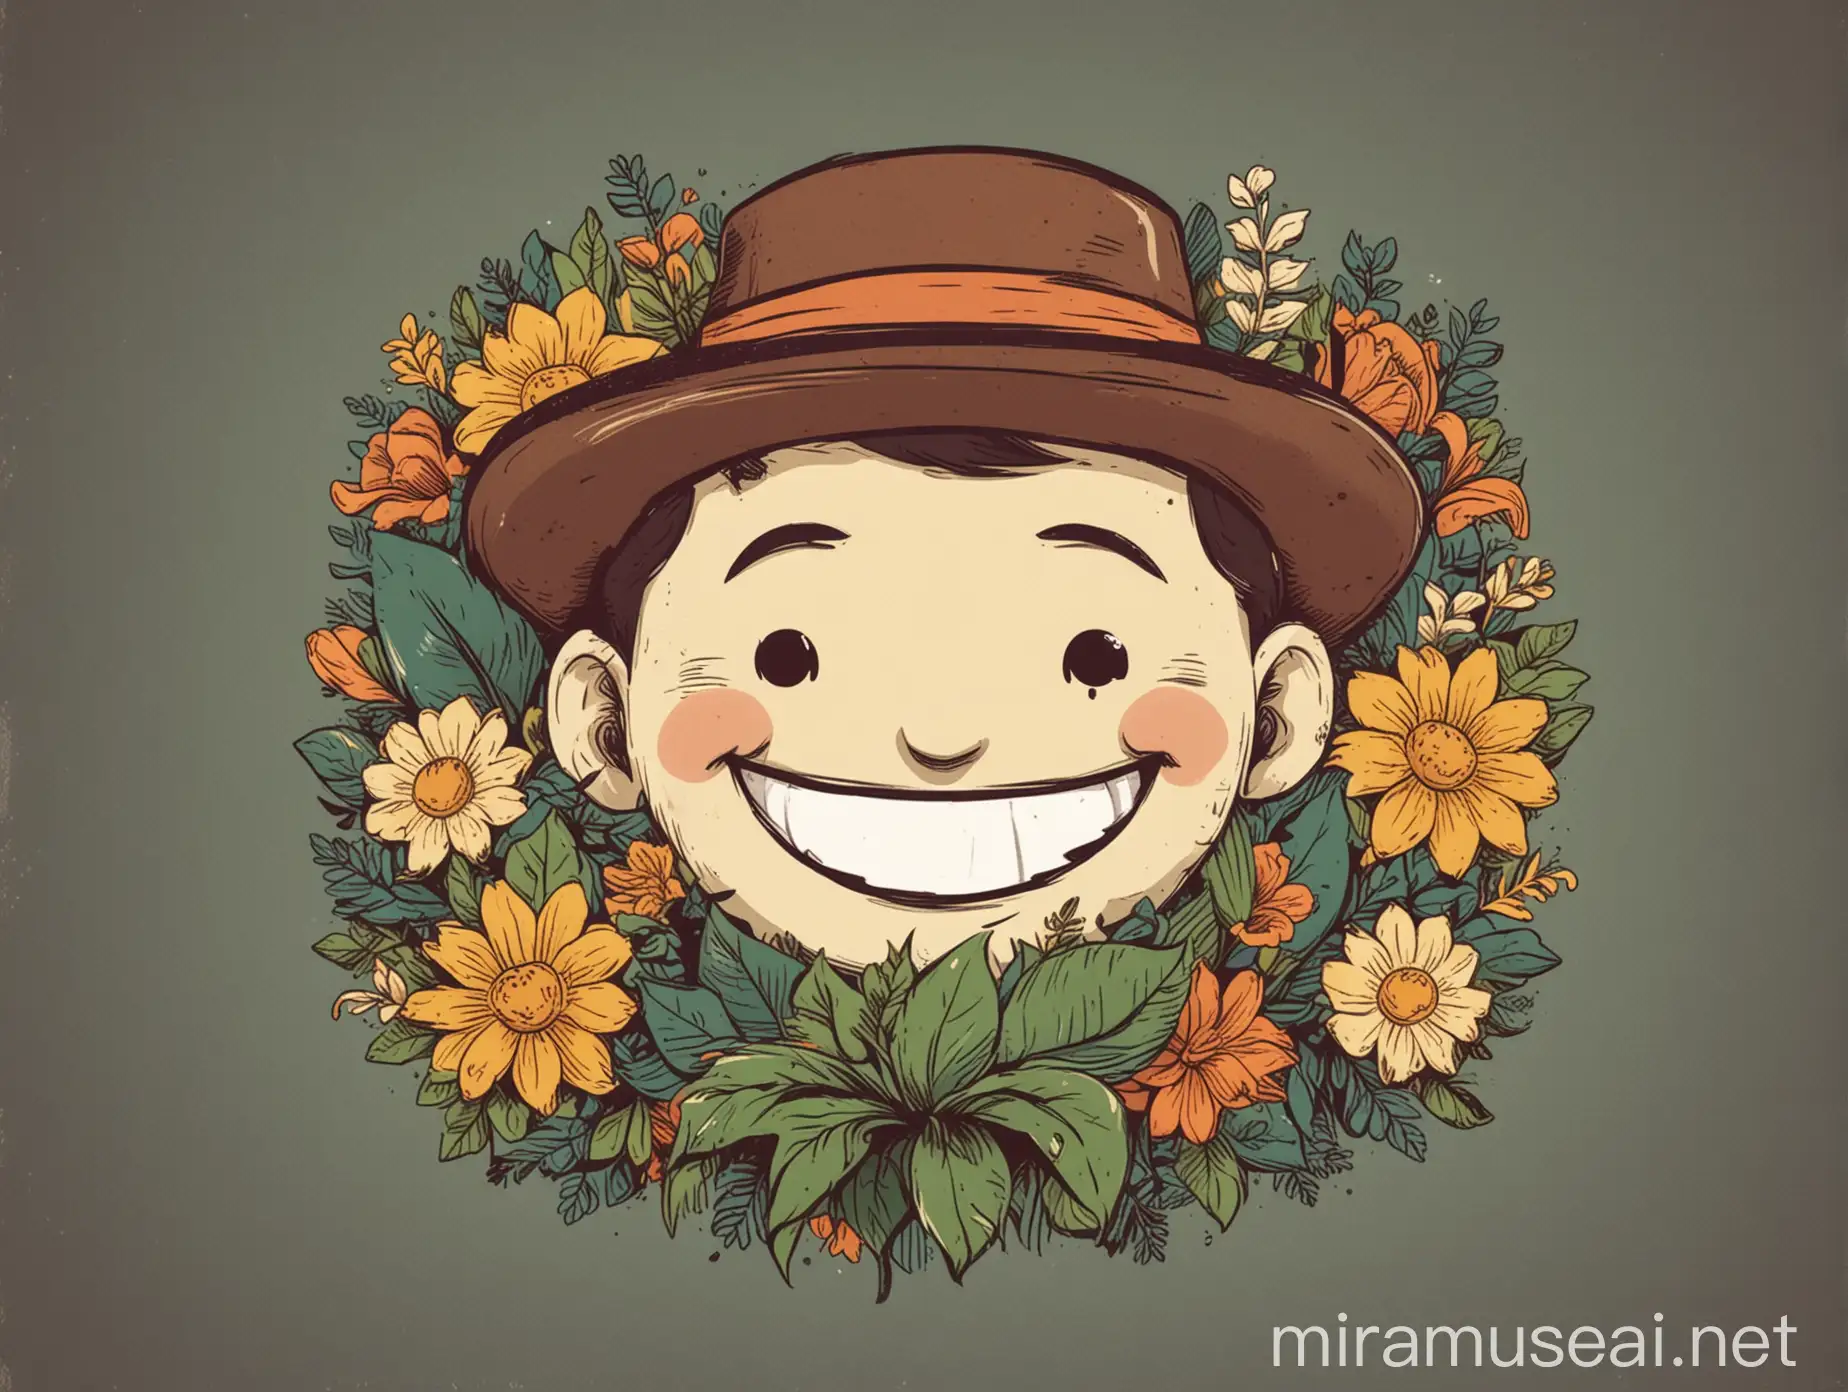 Smiling Gentleman Adorning Campus with Flowers Illustration Style